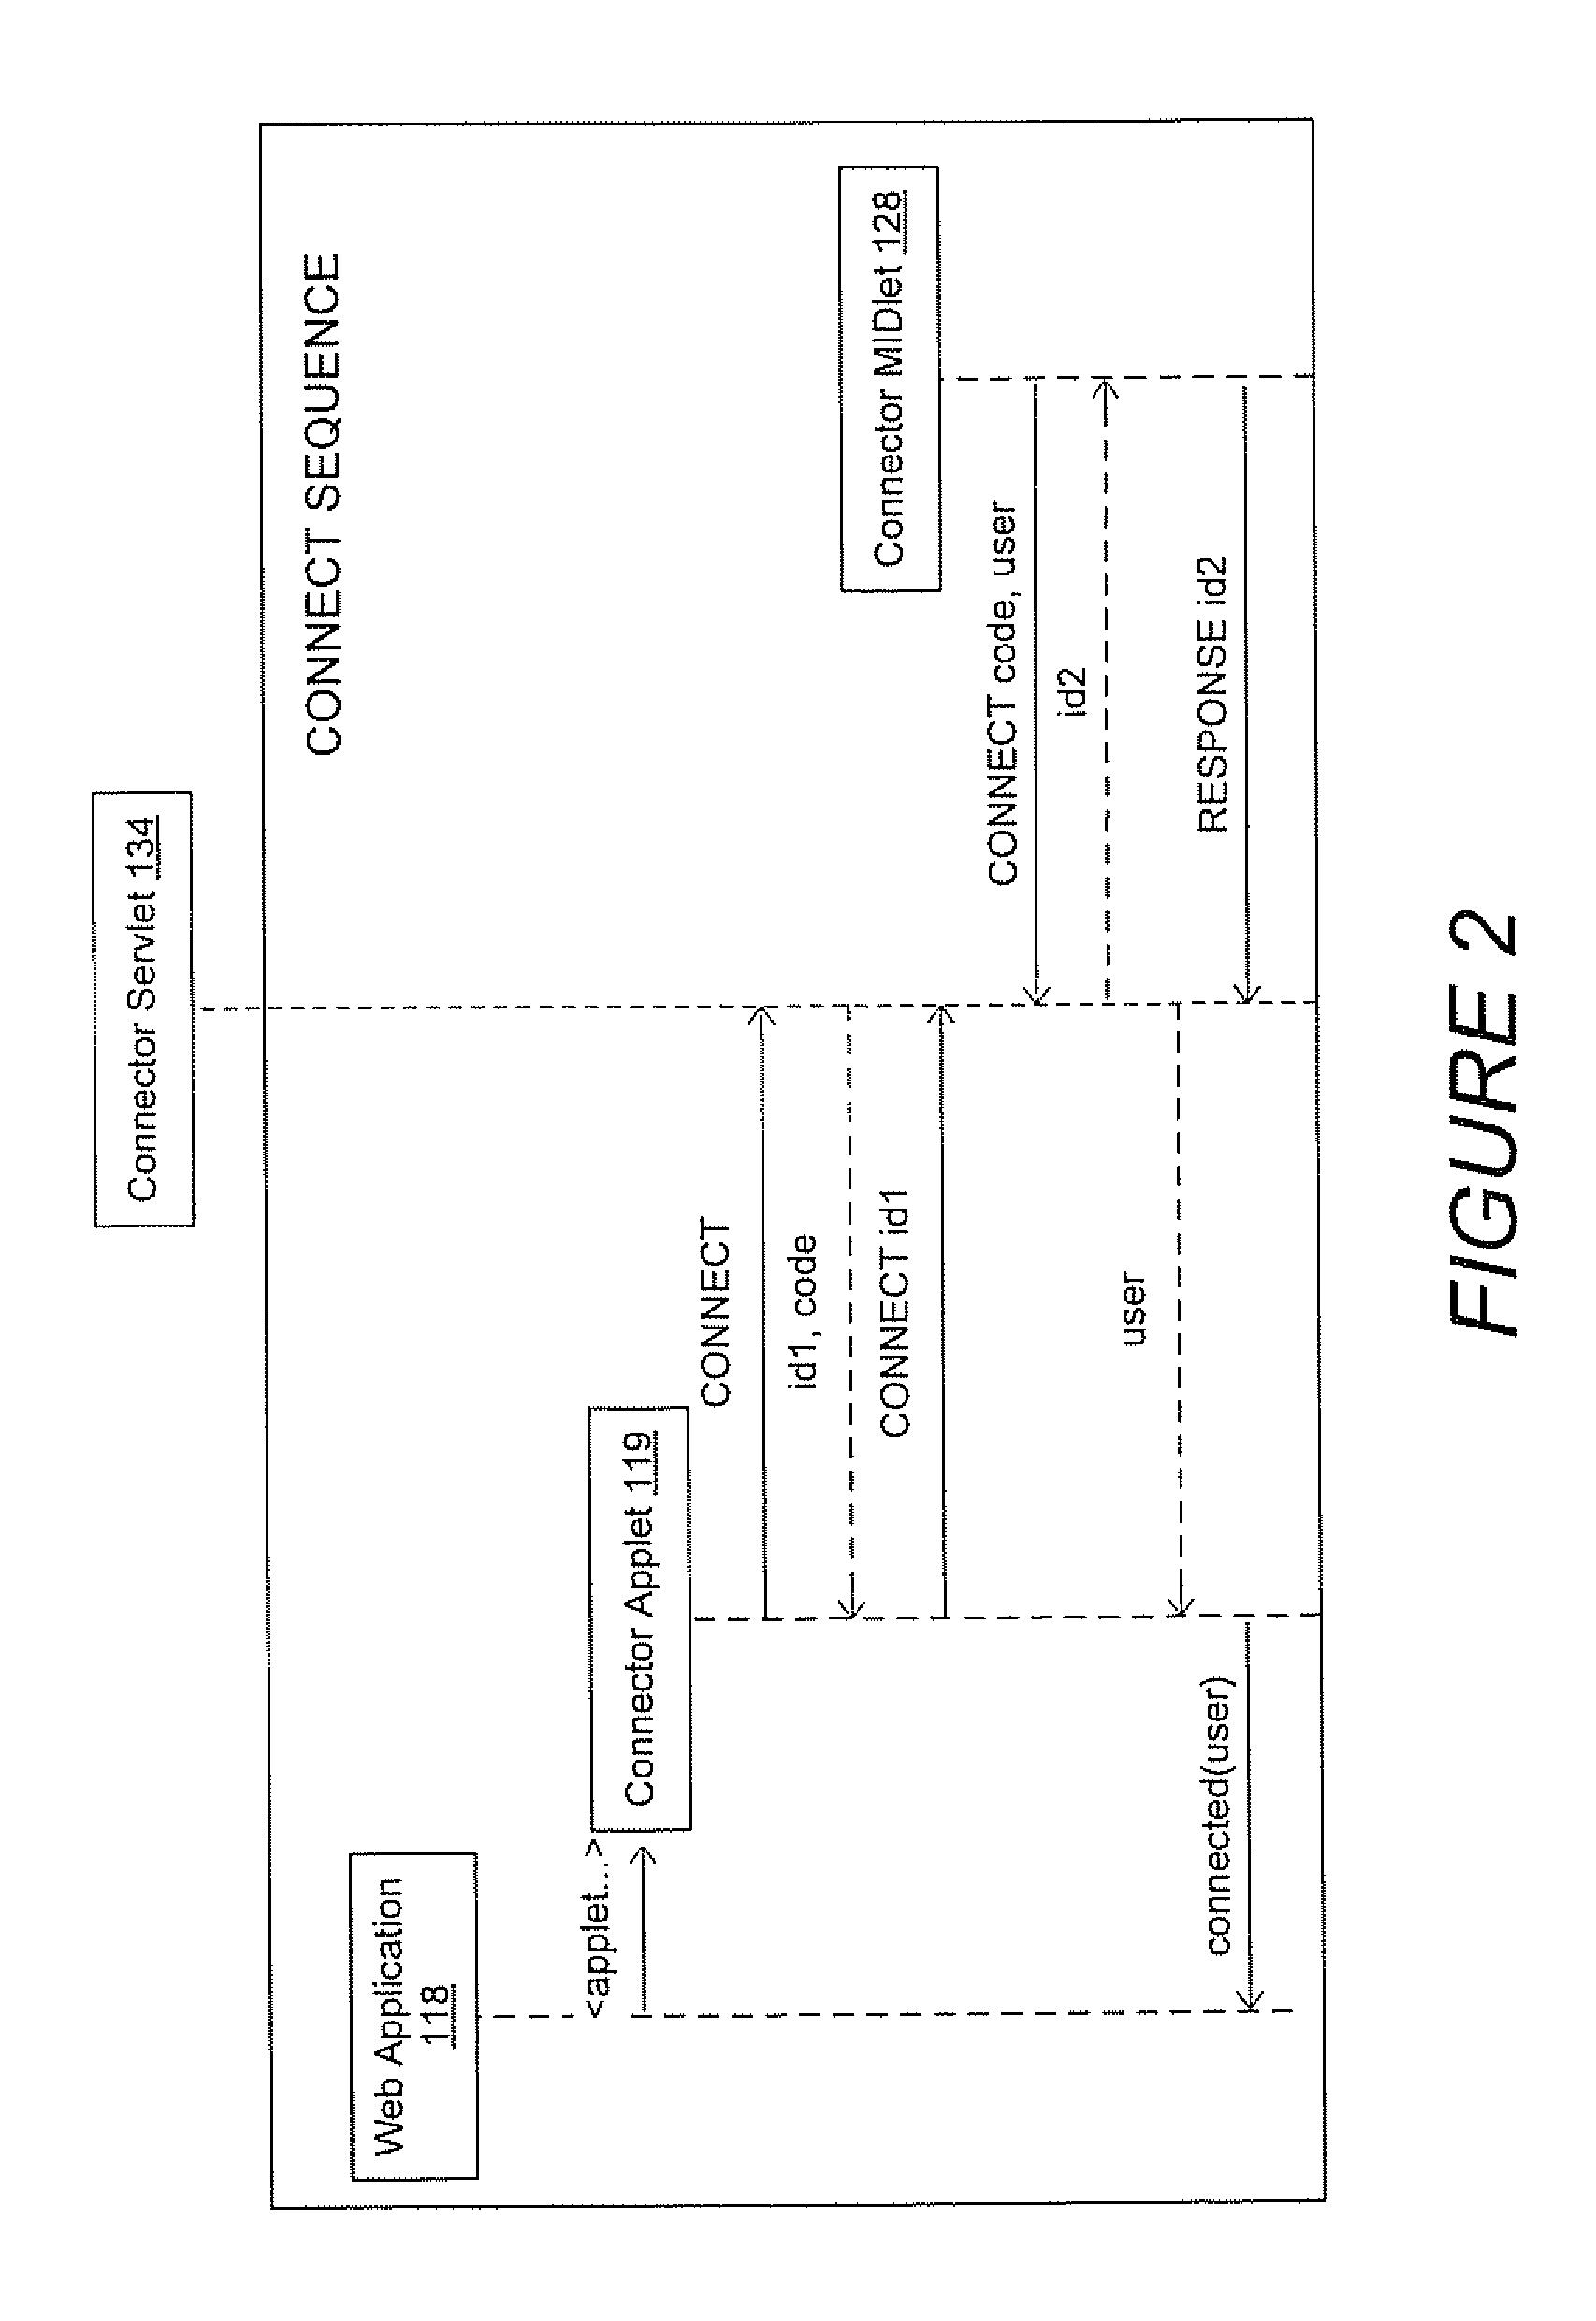 Interconnecting Applications on Personal Computers and Mobile Terminals Through a Web Server